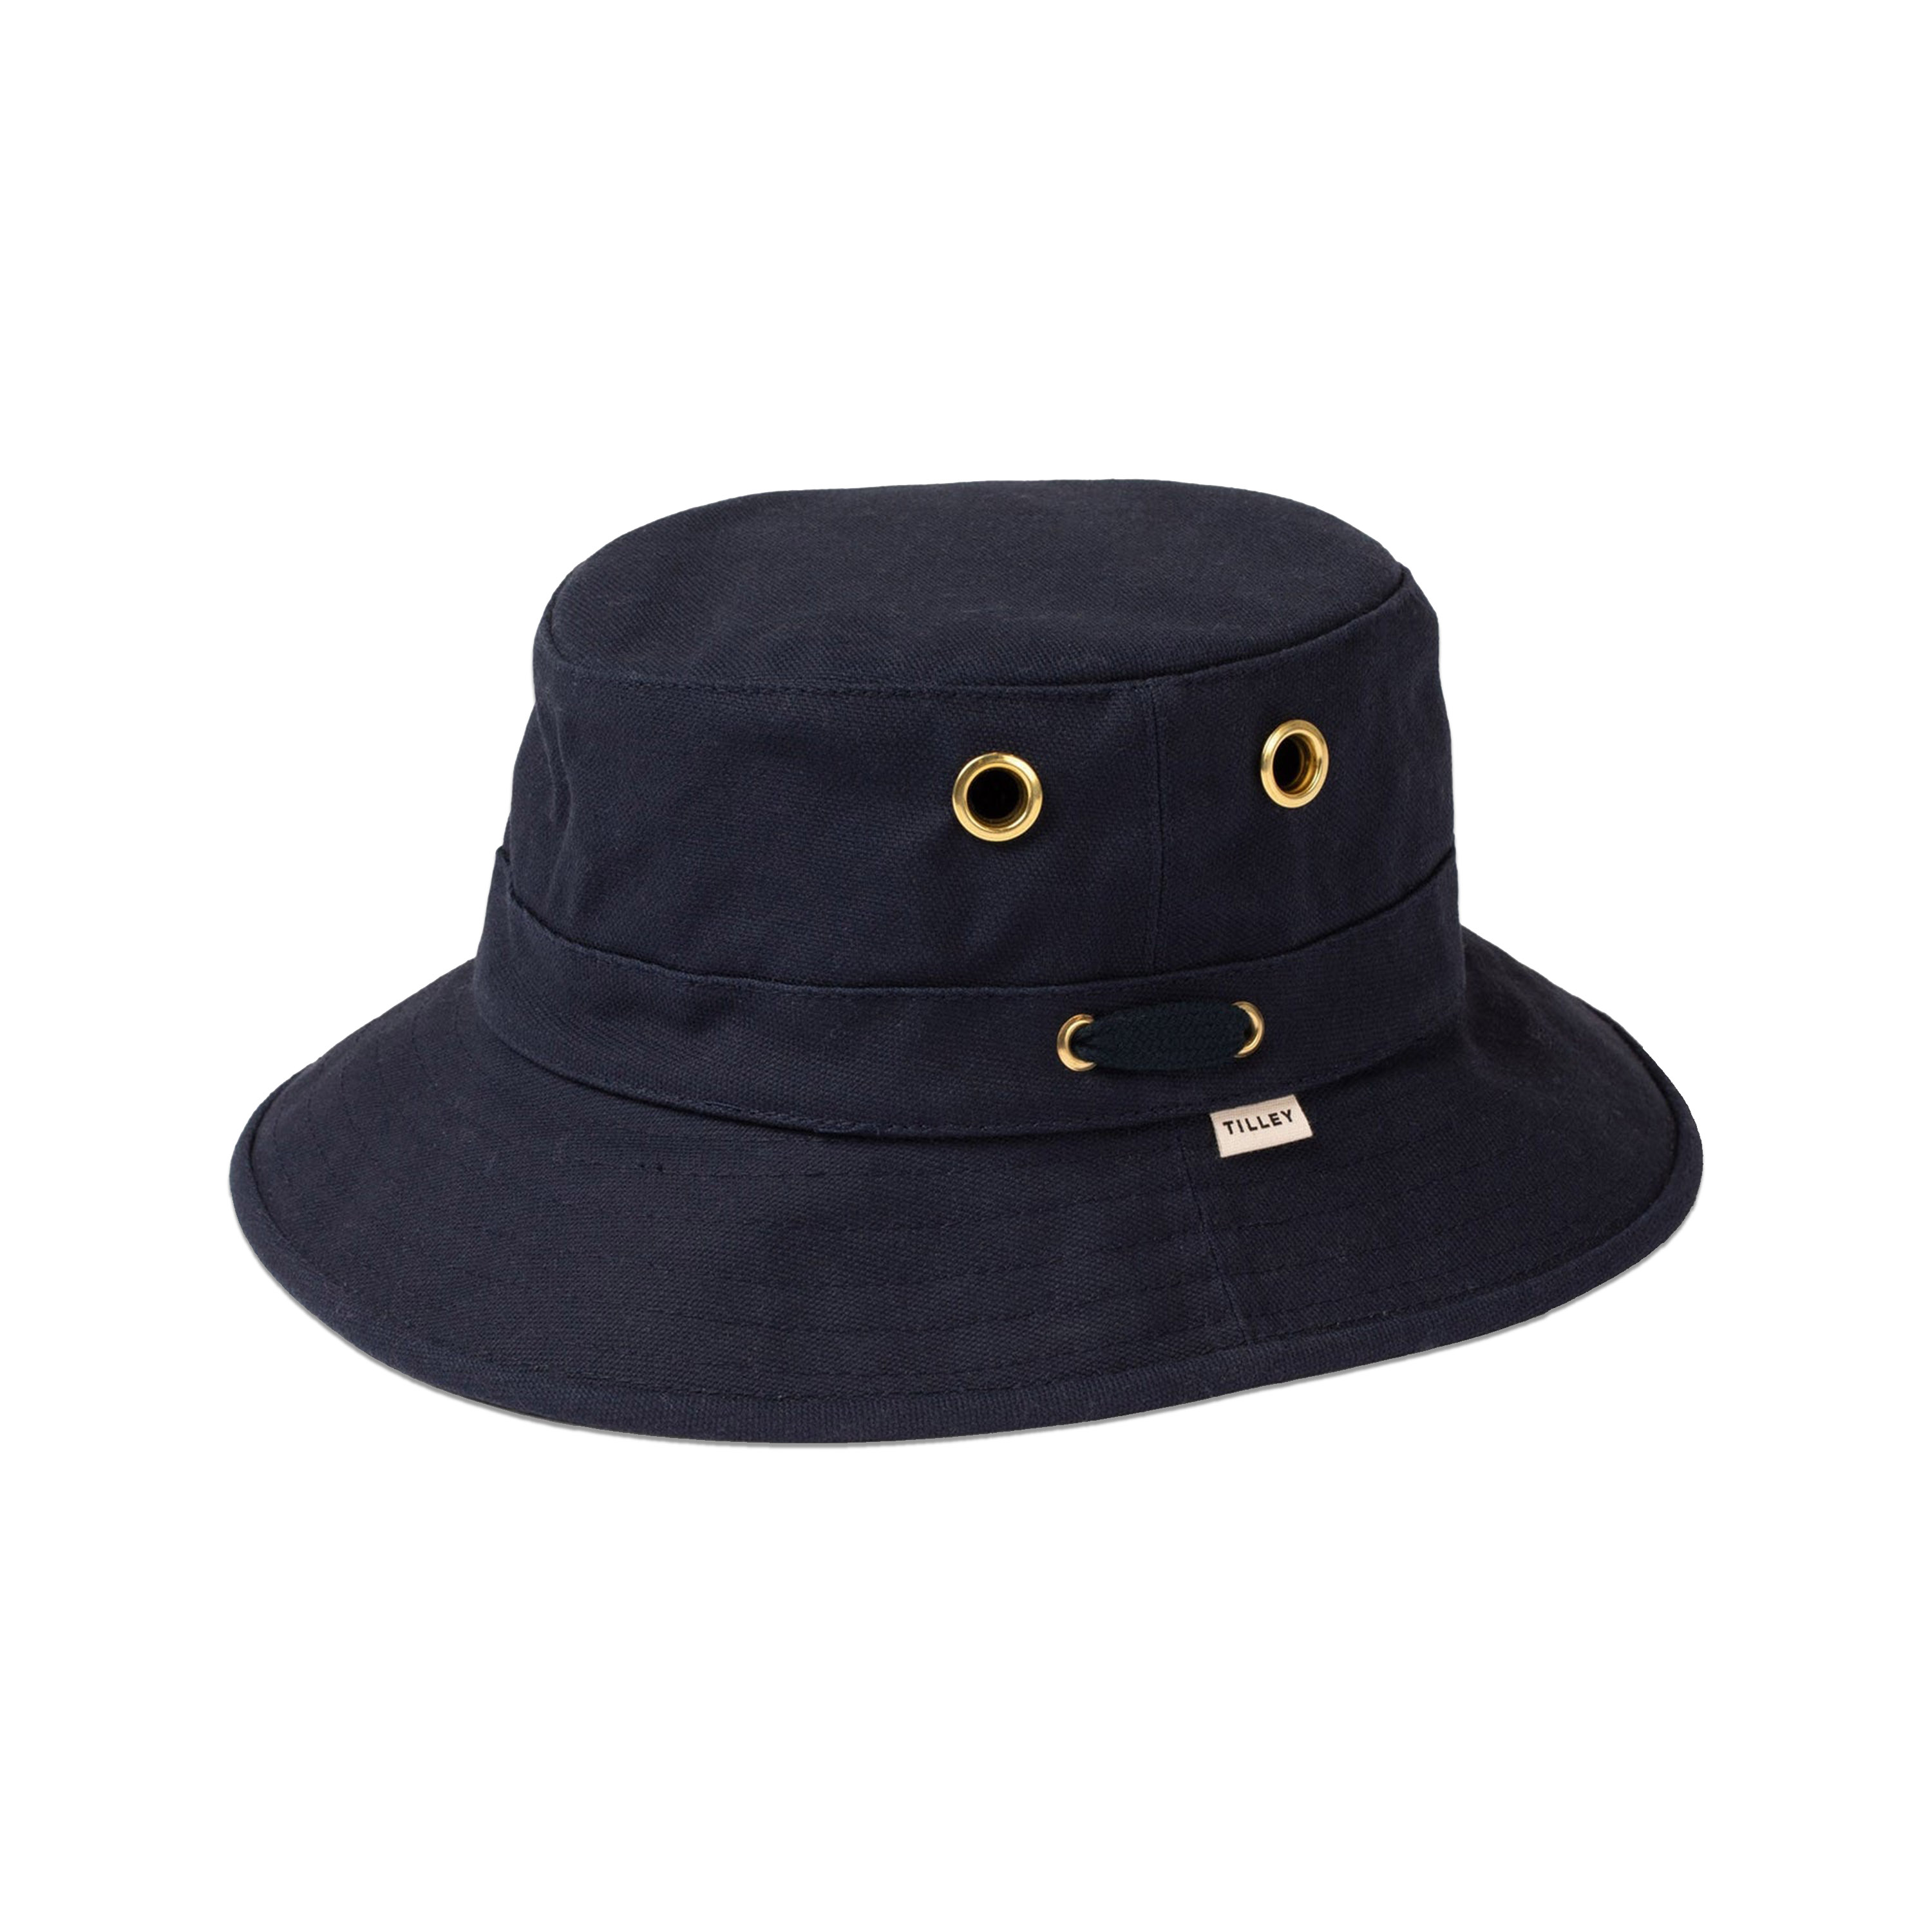 Tilley T1 Iconic Bucket Hat